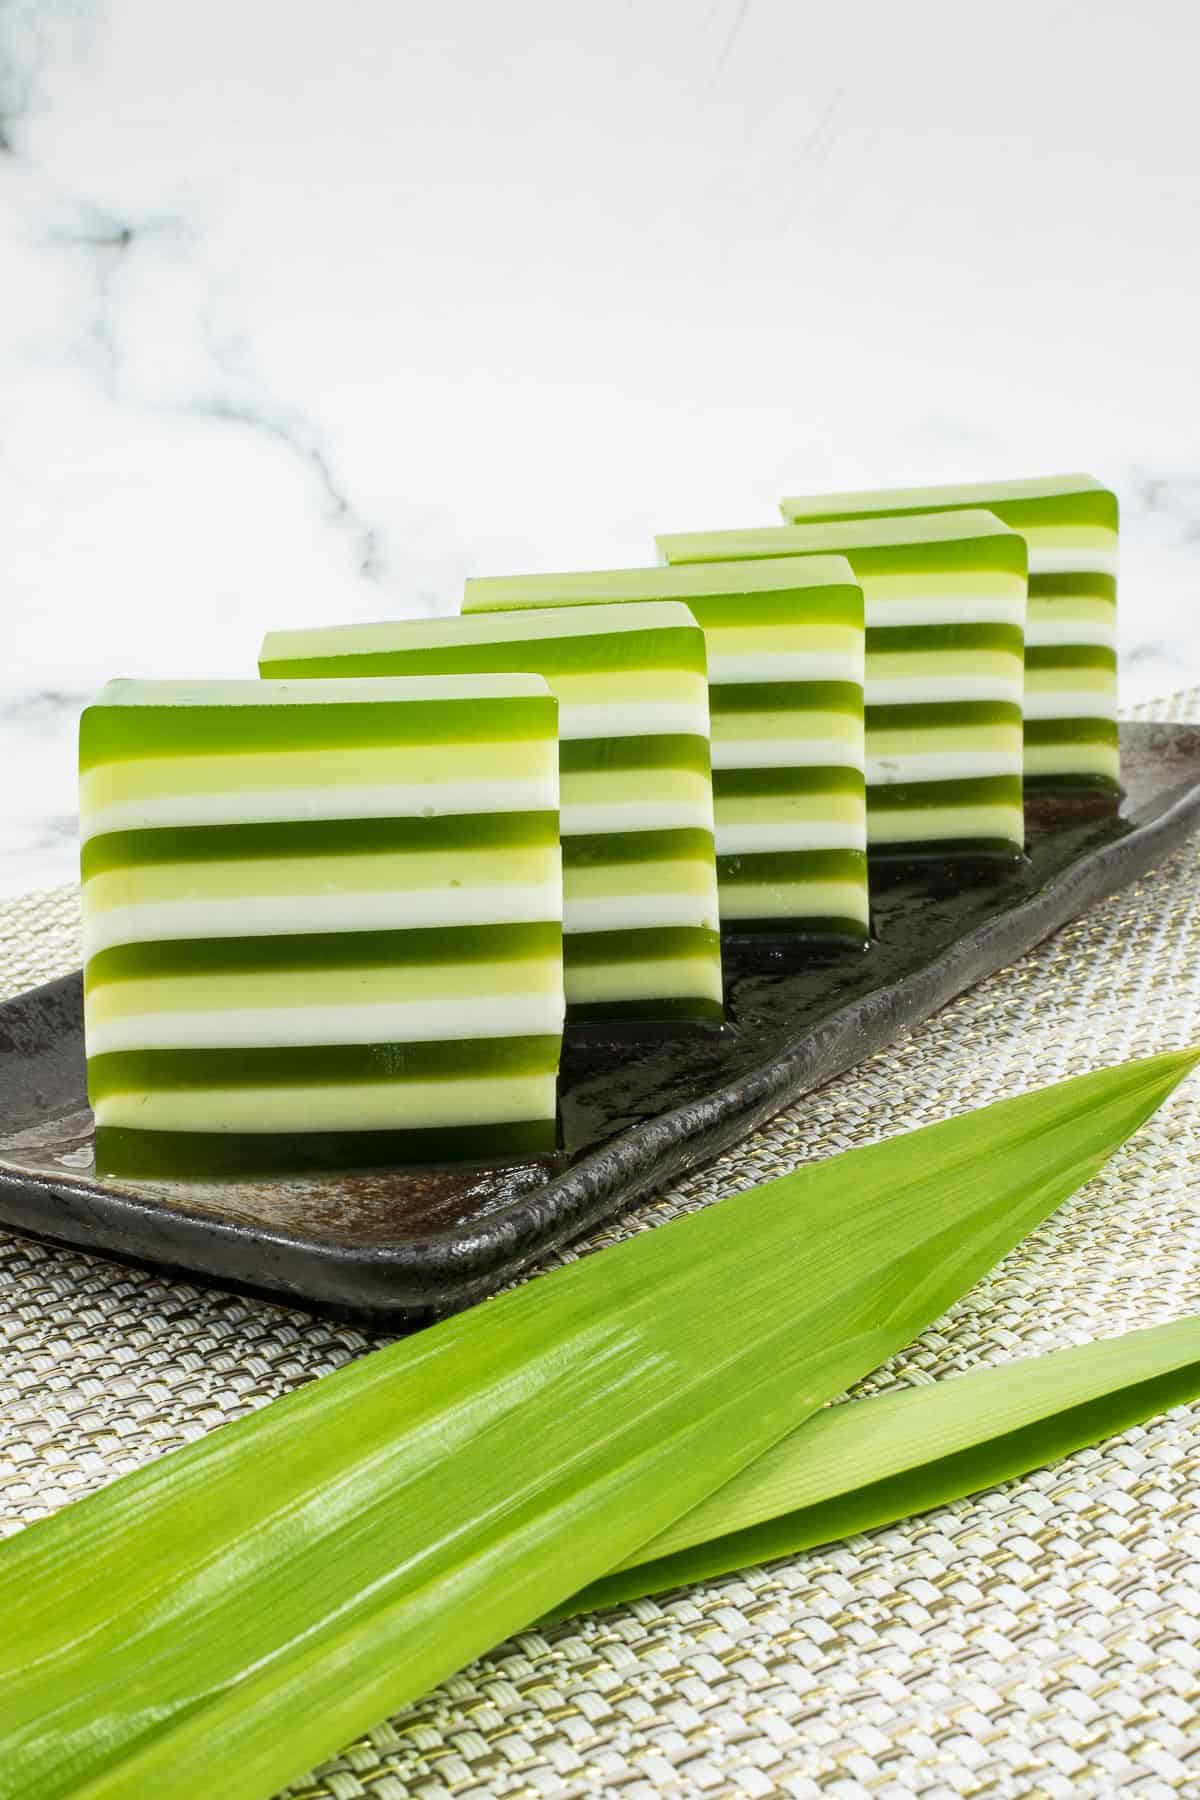 Green and white layered jelly cut into pieces and arranged on a brown rectangle plate.